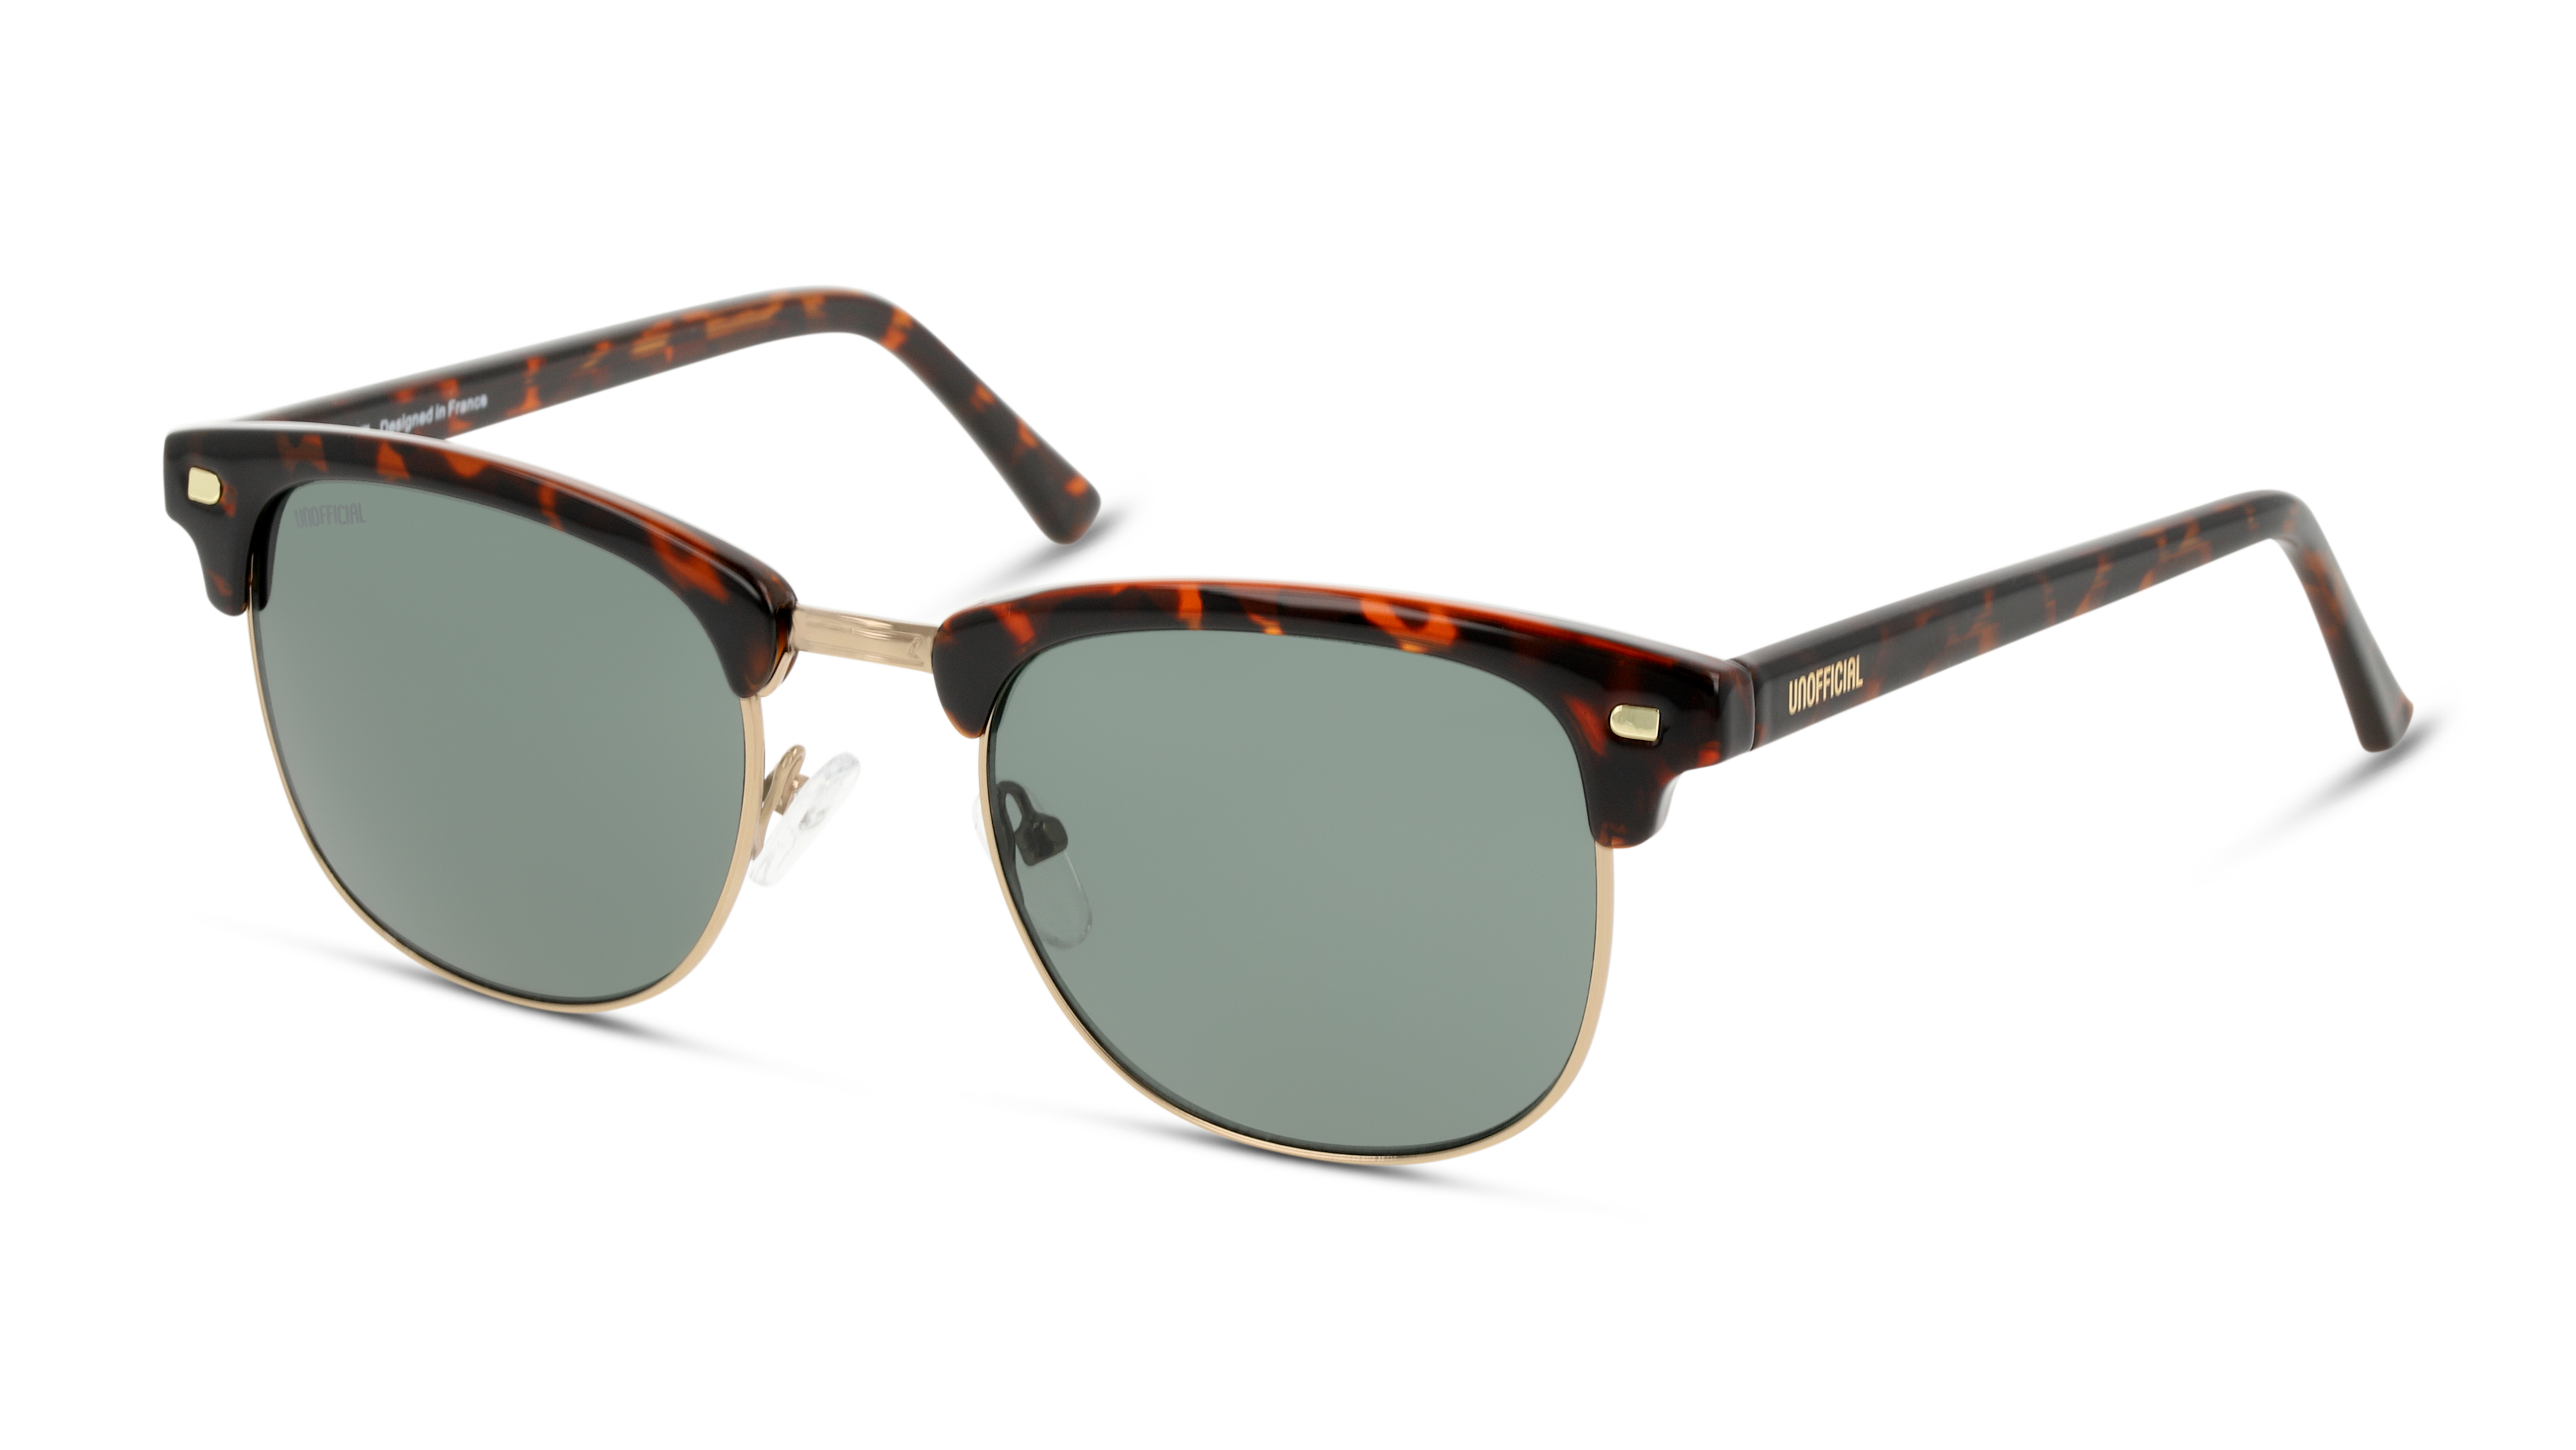 Angle_Left01 Unofficial UNSM0101 (DHE0) Sunglasses Green / Gold